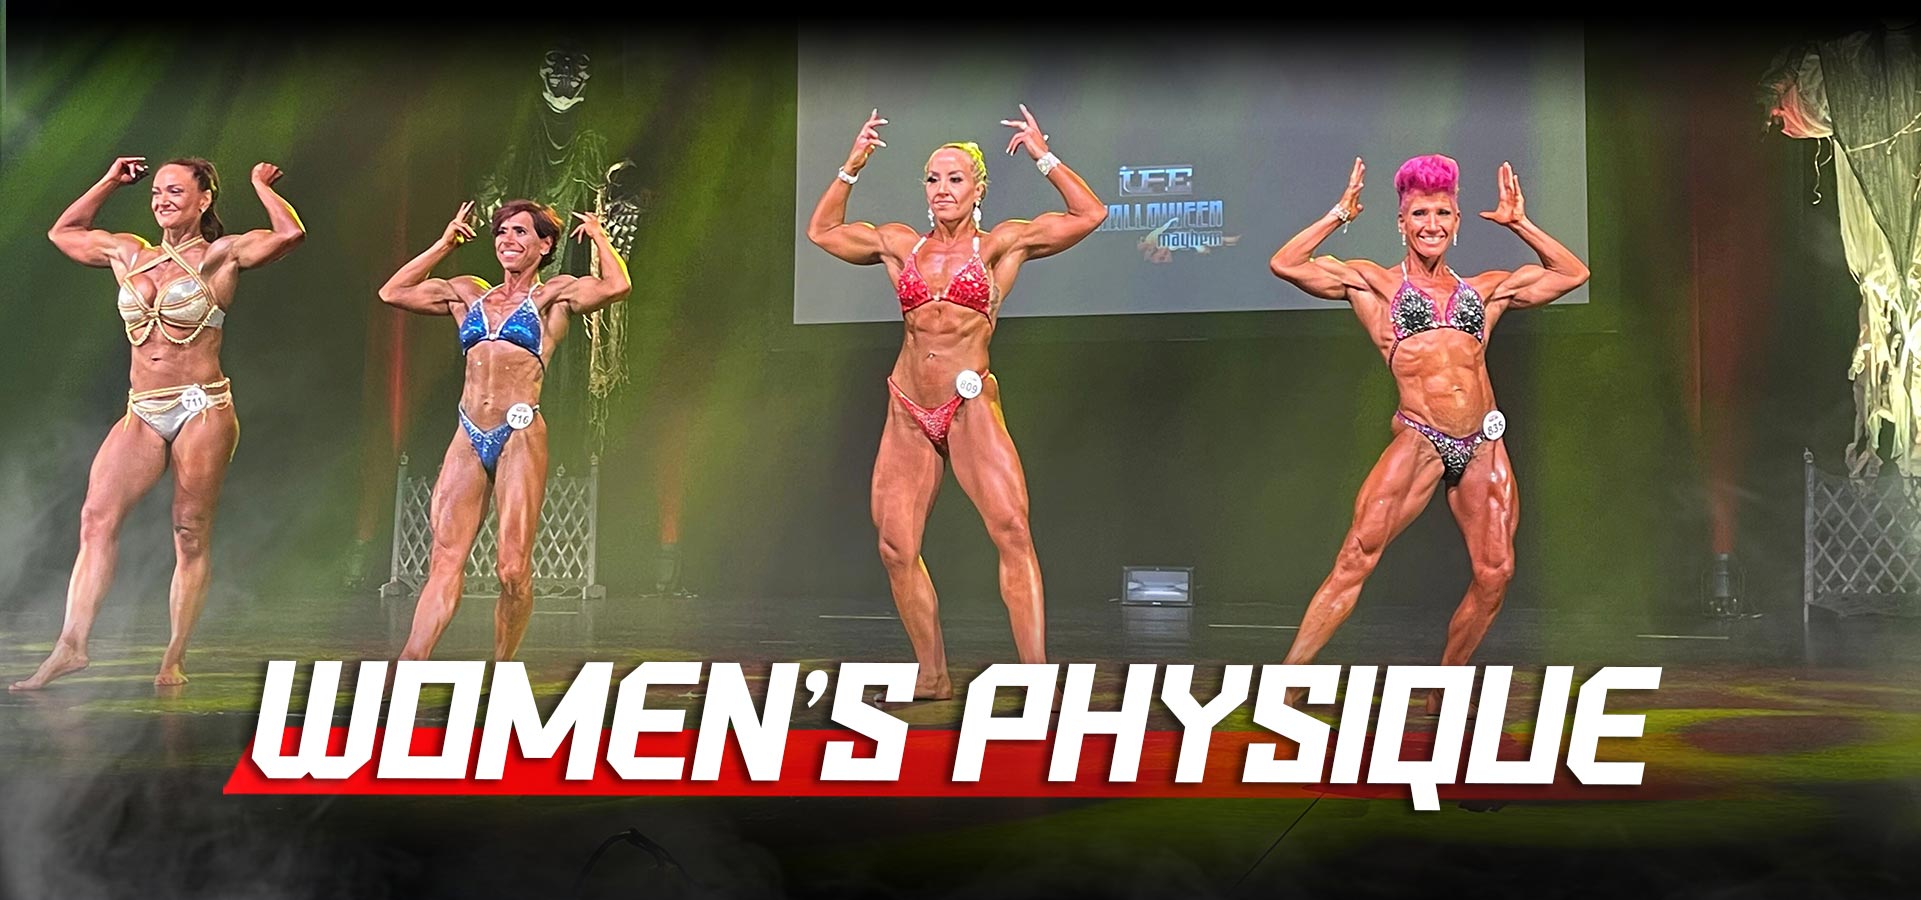 ANBF Tv: Women's Physique Posing - The American Natural Bodybuilding  Federation